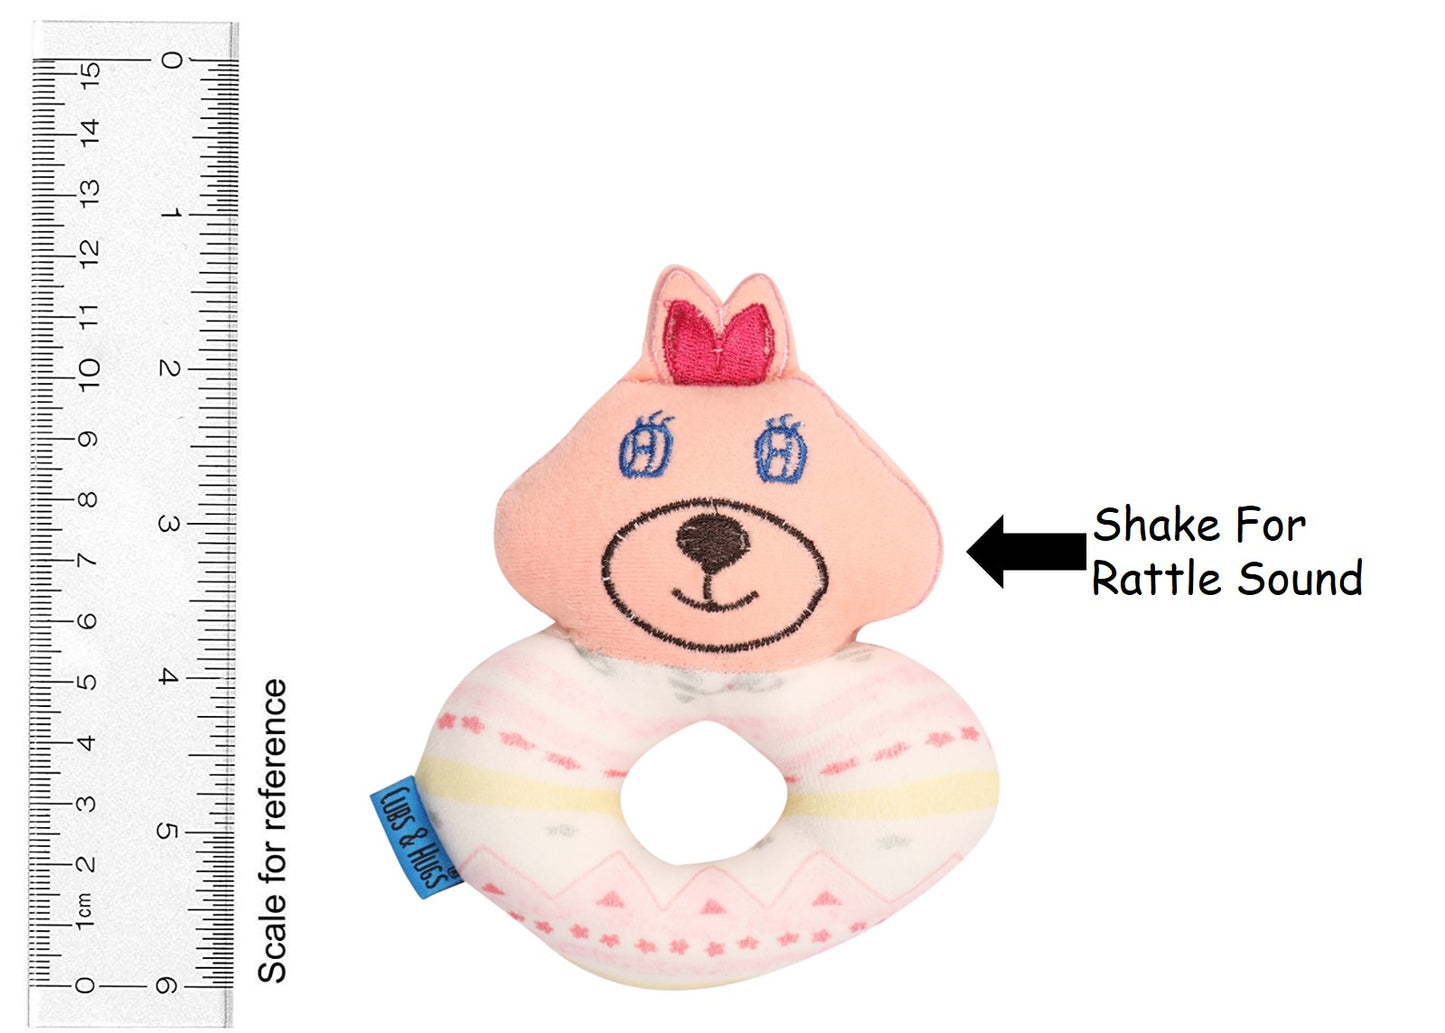 Face Rattle Cum Soft Toy (Squeeze Handle for Squeaky Sound)